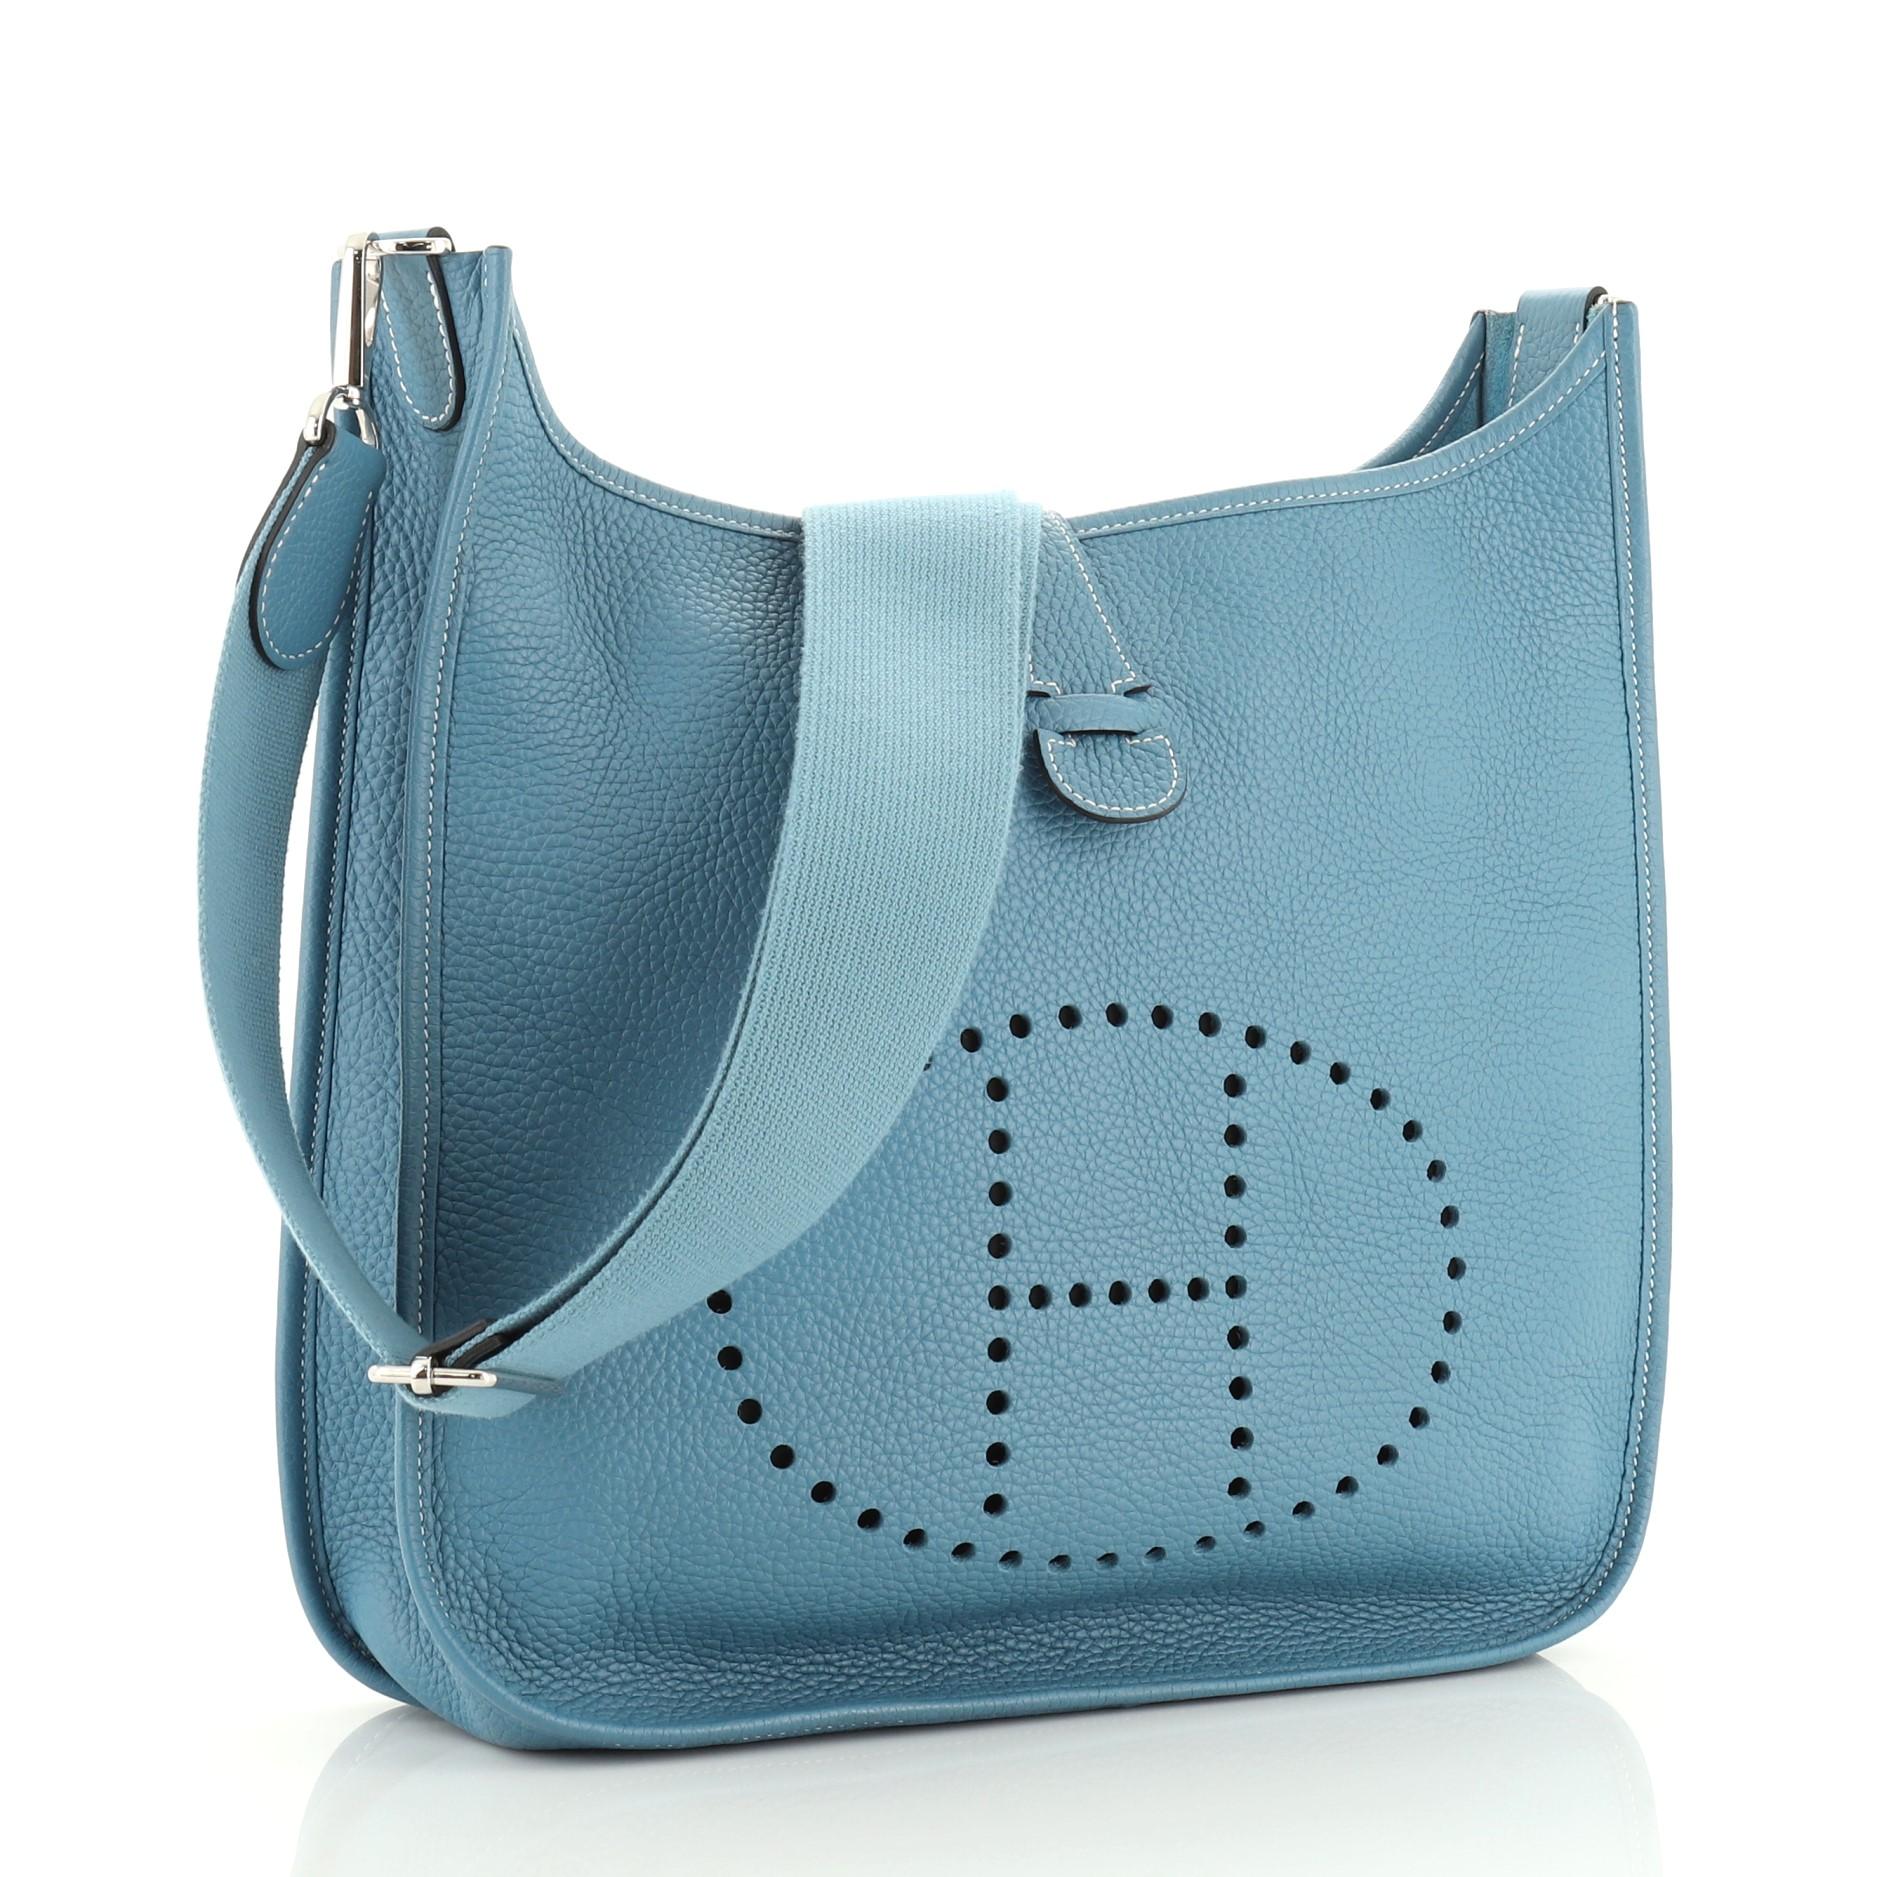 This Hermes Evelyne Crossbody Gen III Clemence GM, crafted in Bleu Jean blue Clemence leather, features perforated H design at the front, accessible back pocket, adjustable shoulder strap, and palladium hardware. It opens to a Bleu Jean blue raw